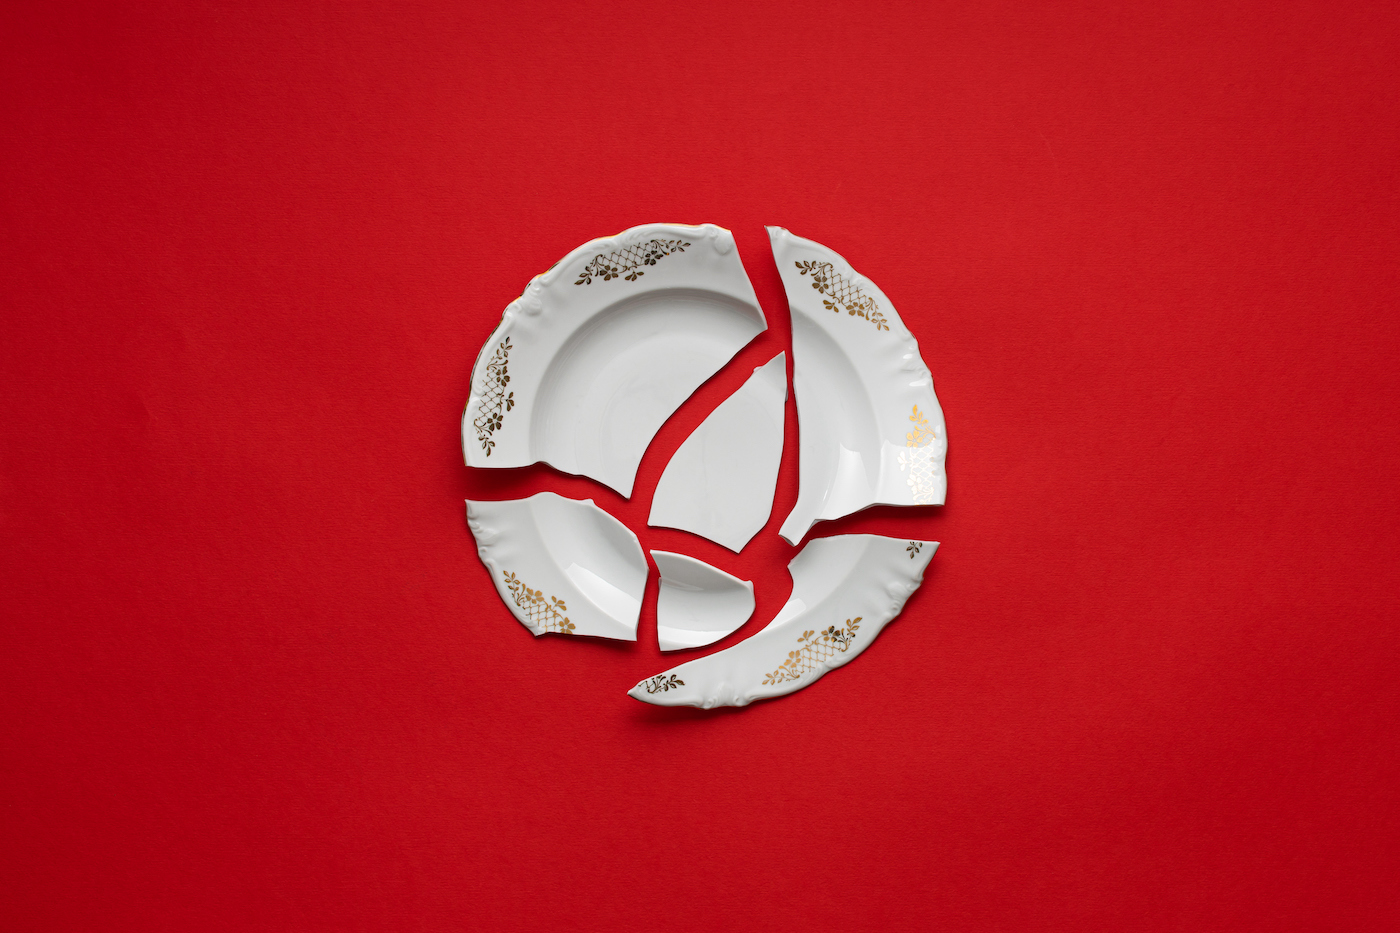 A broken white plate on a red background